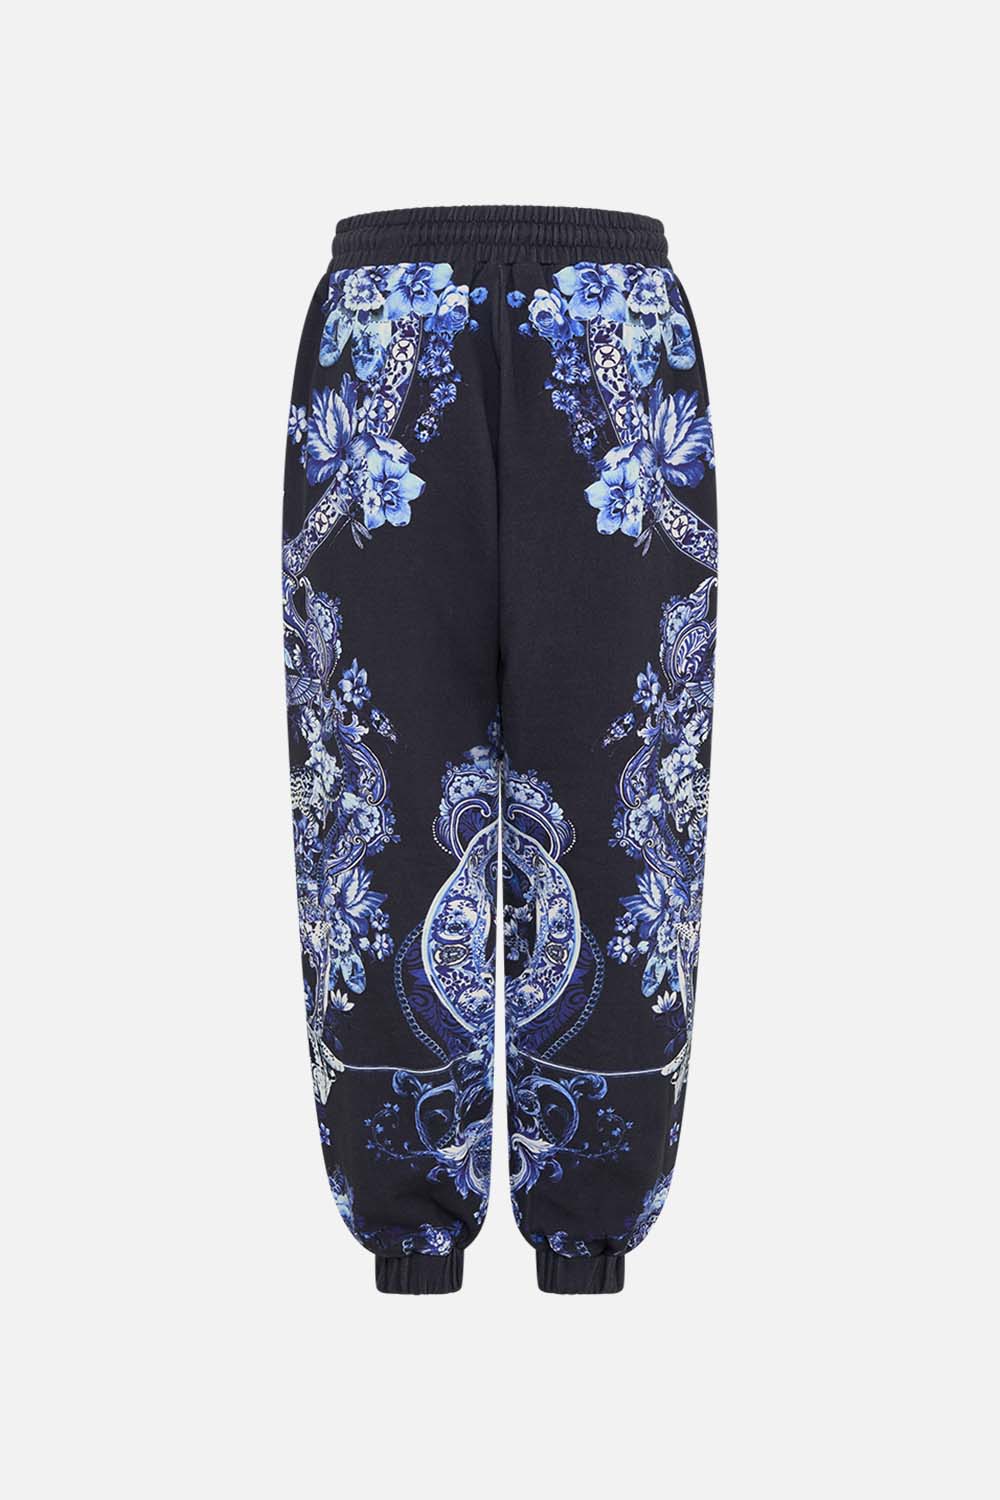 Back view of CAMILLA designer track pants in Delft Dynasty print 